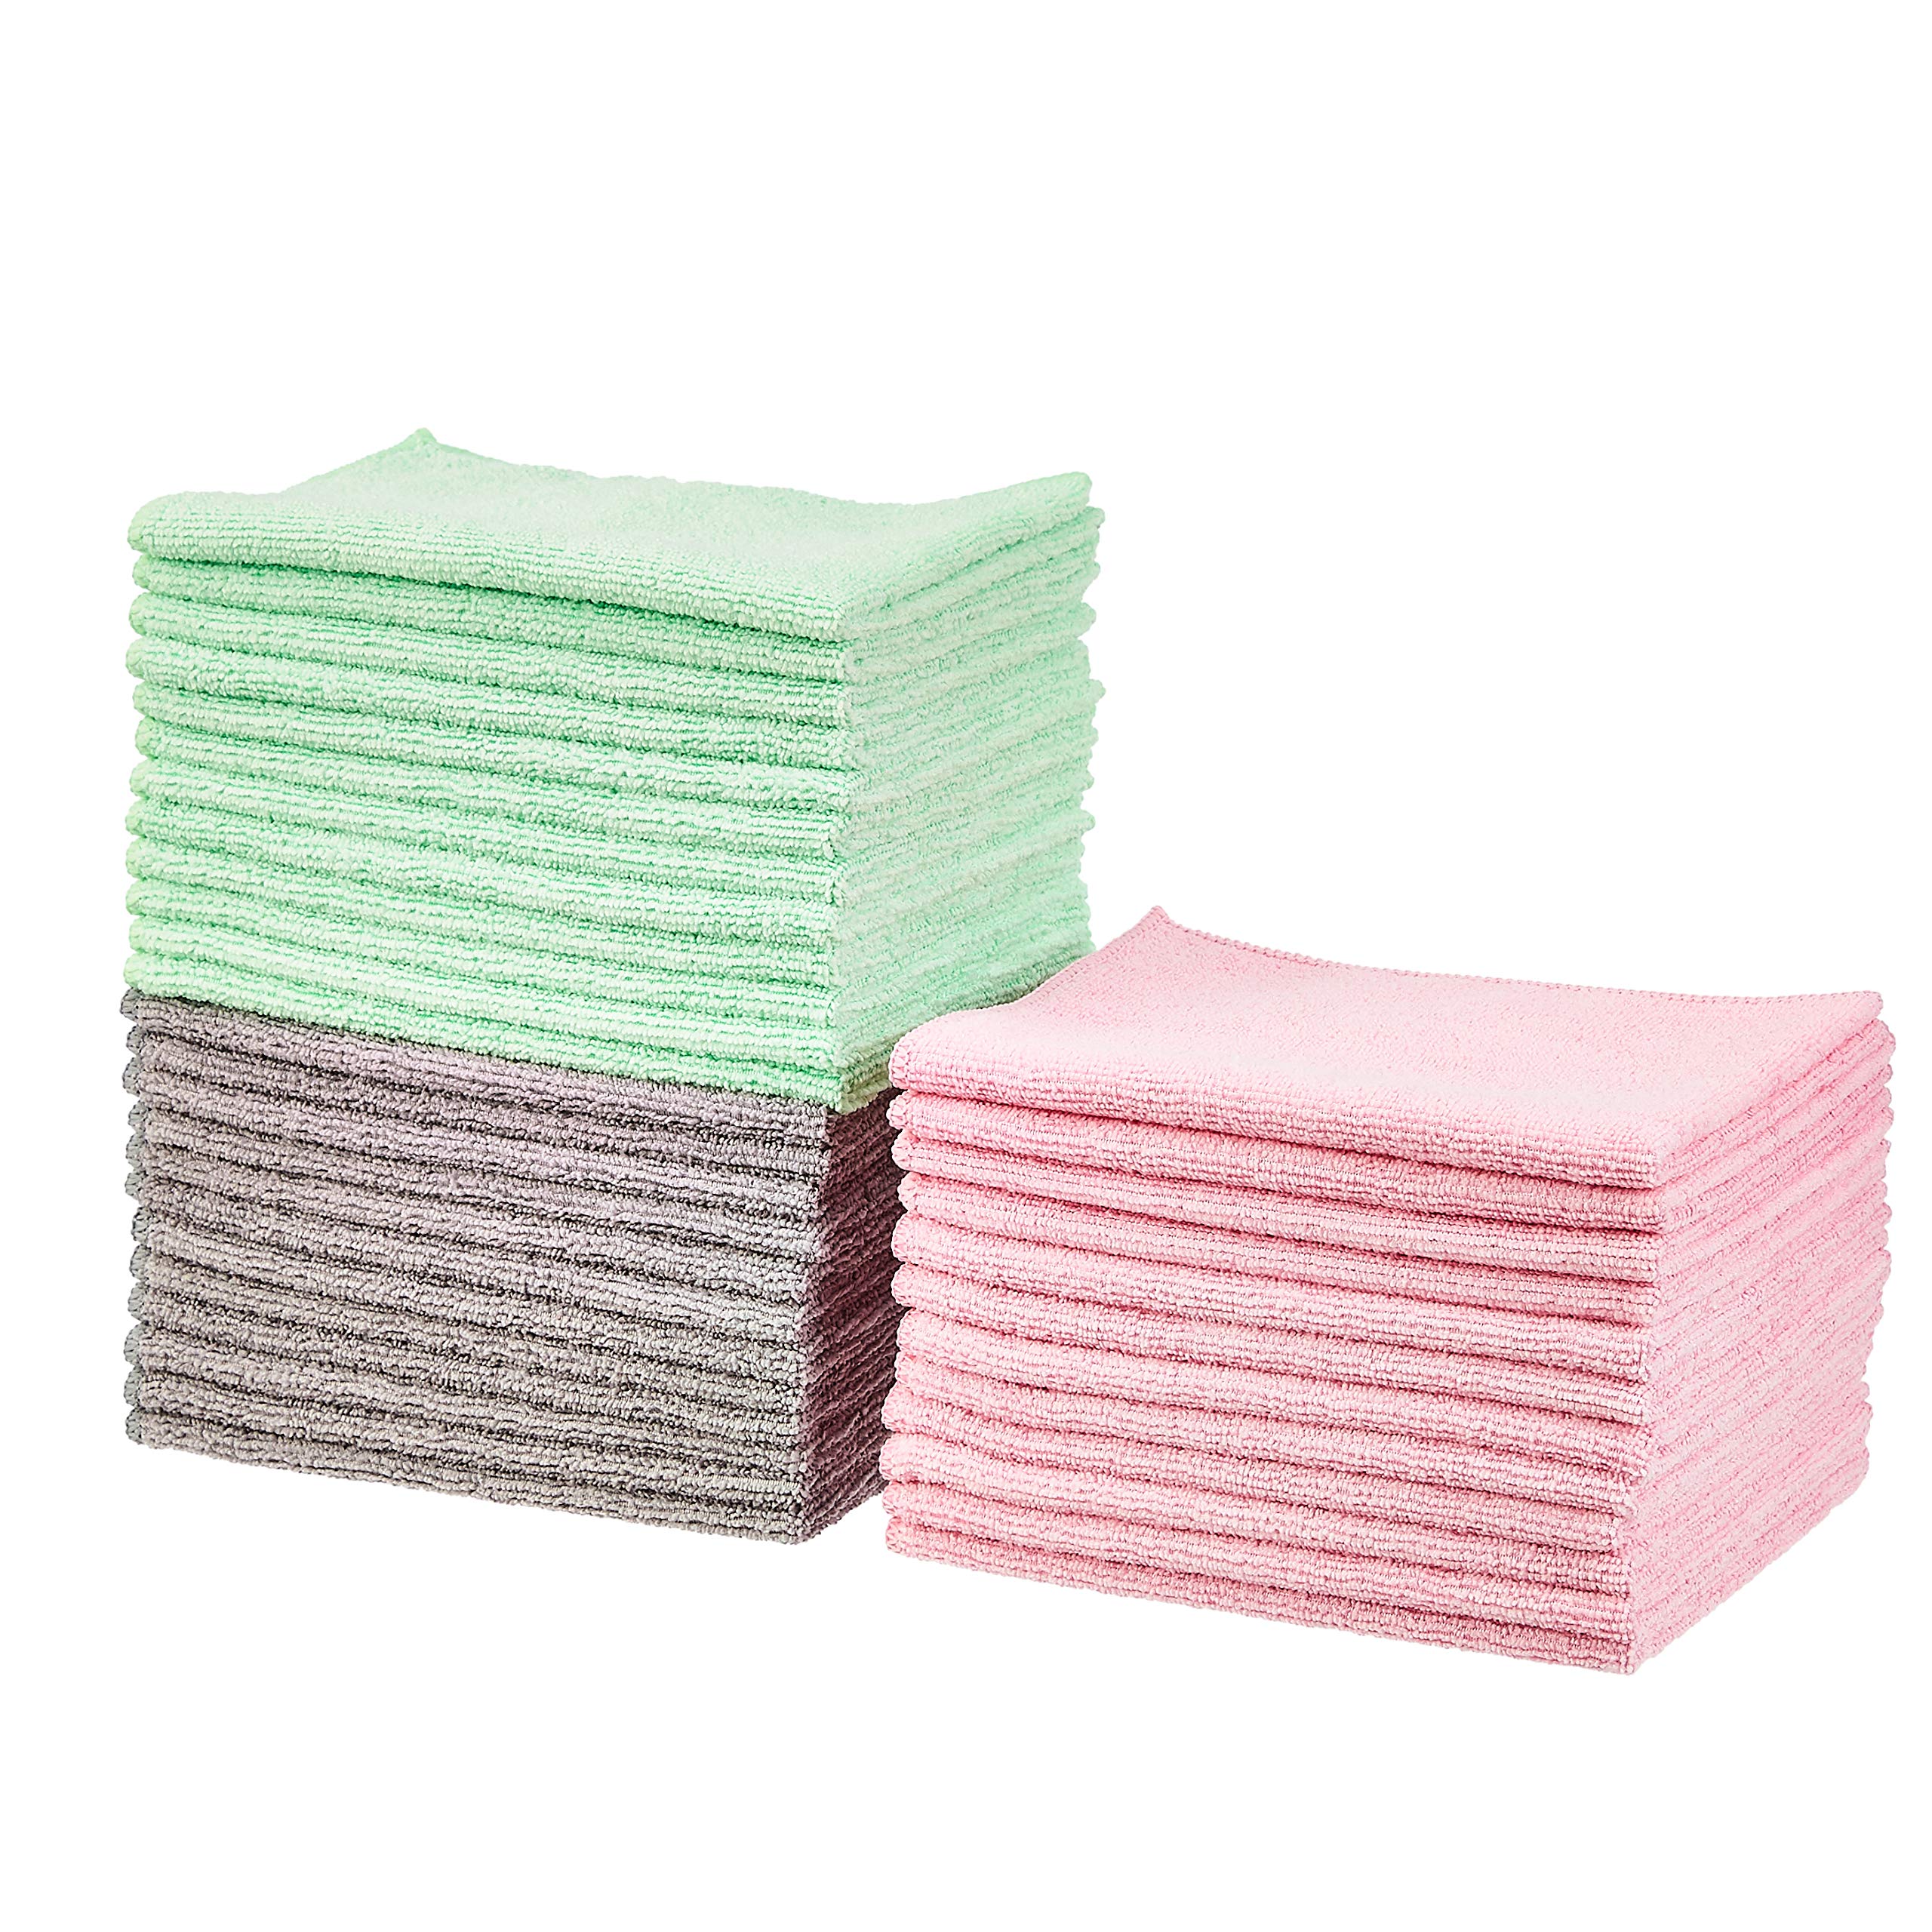 Amazon Basics Microfiber Cleaning Cloth, Non-Abrasive, Reusable and Washable, Pack of 36, Green/Gray/Pink, 16